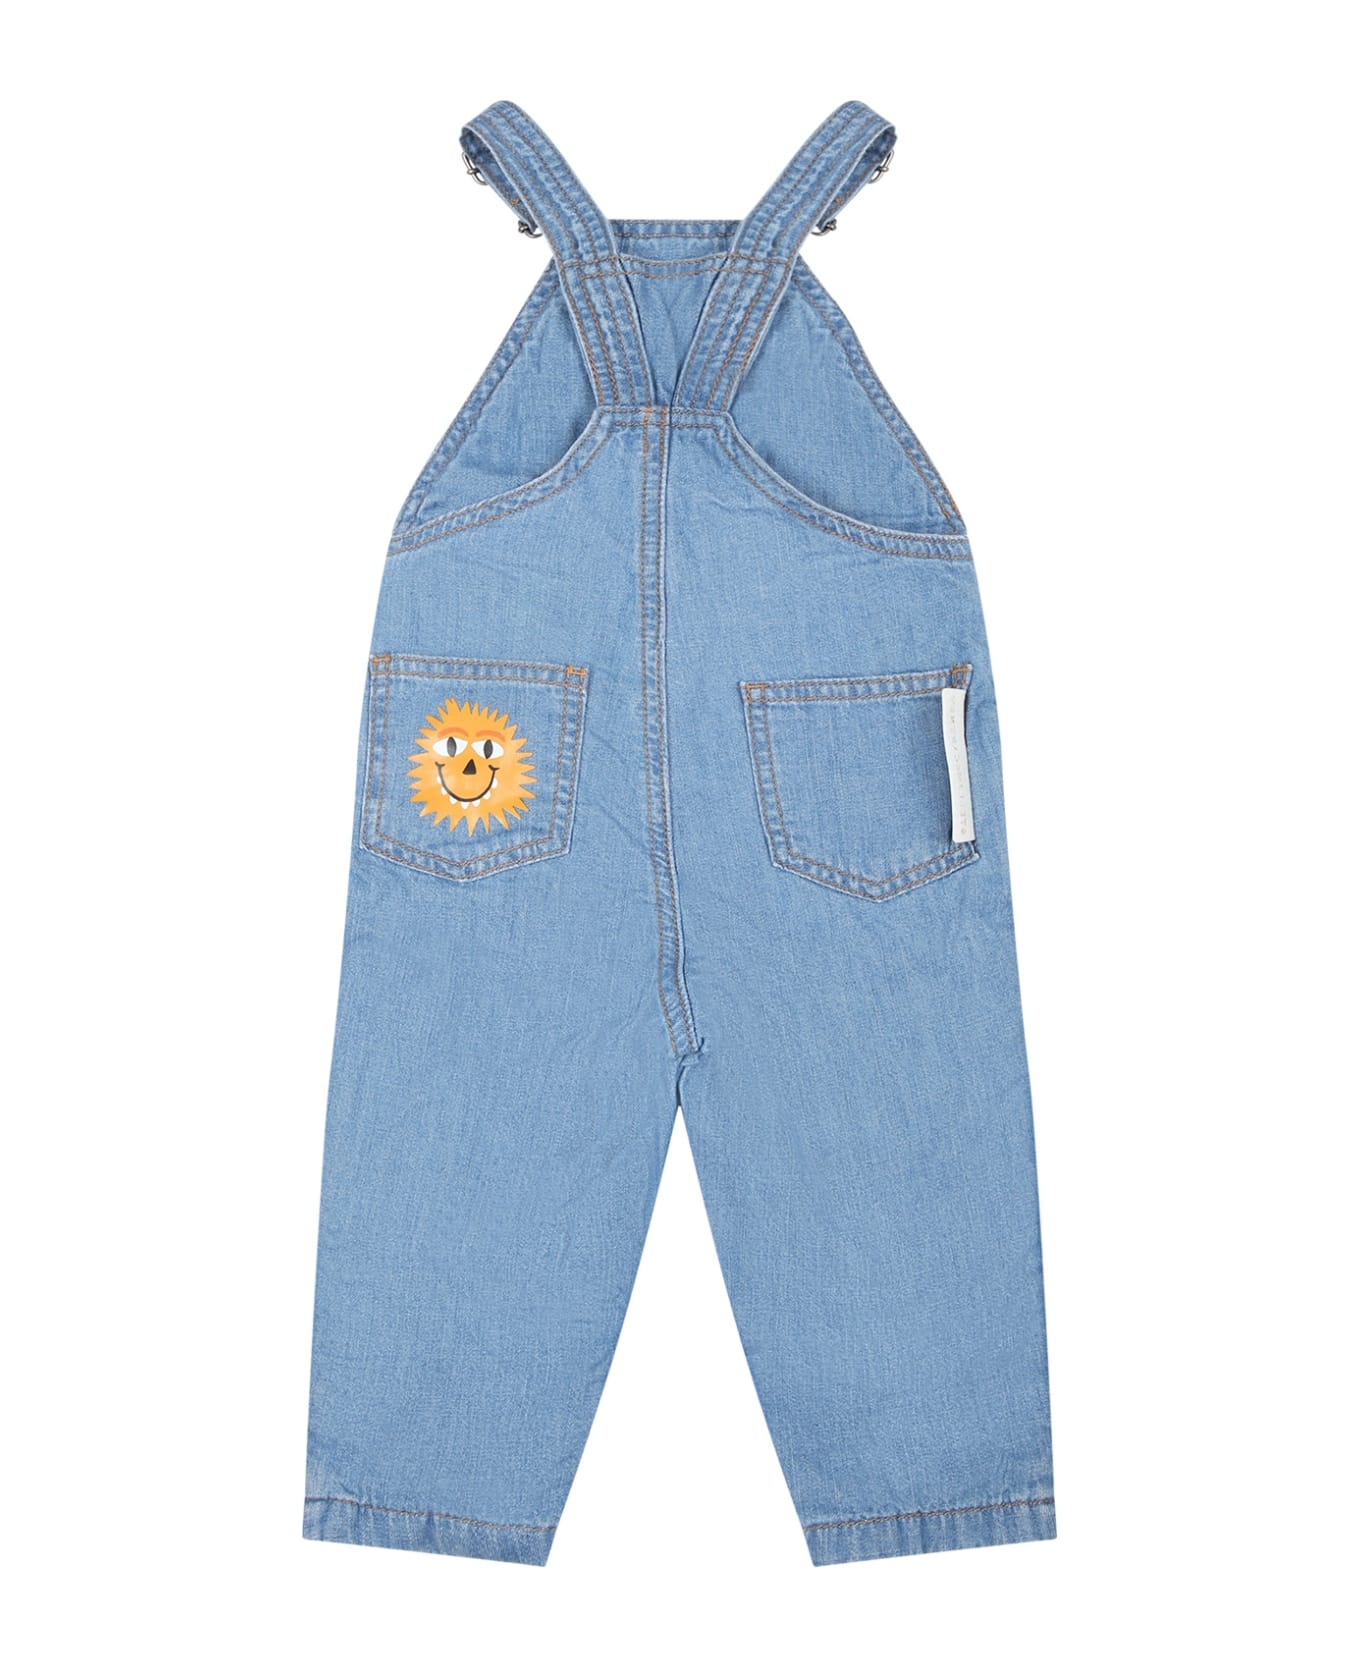 Stella McCartney Kids Blue Dungarees For Baby Boy With Trees Print - Denim